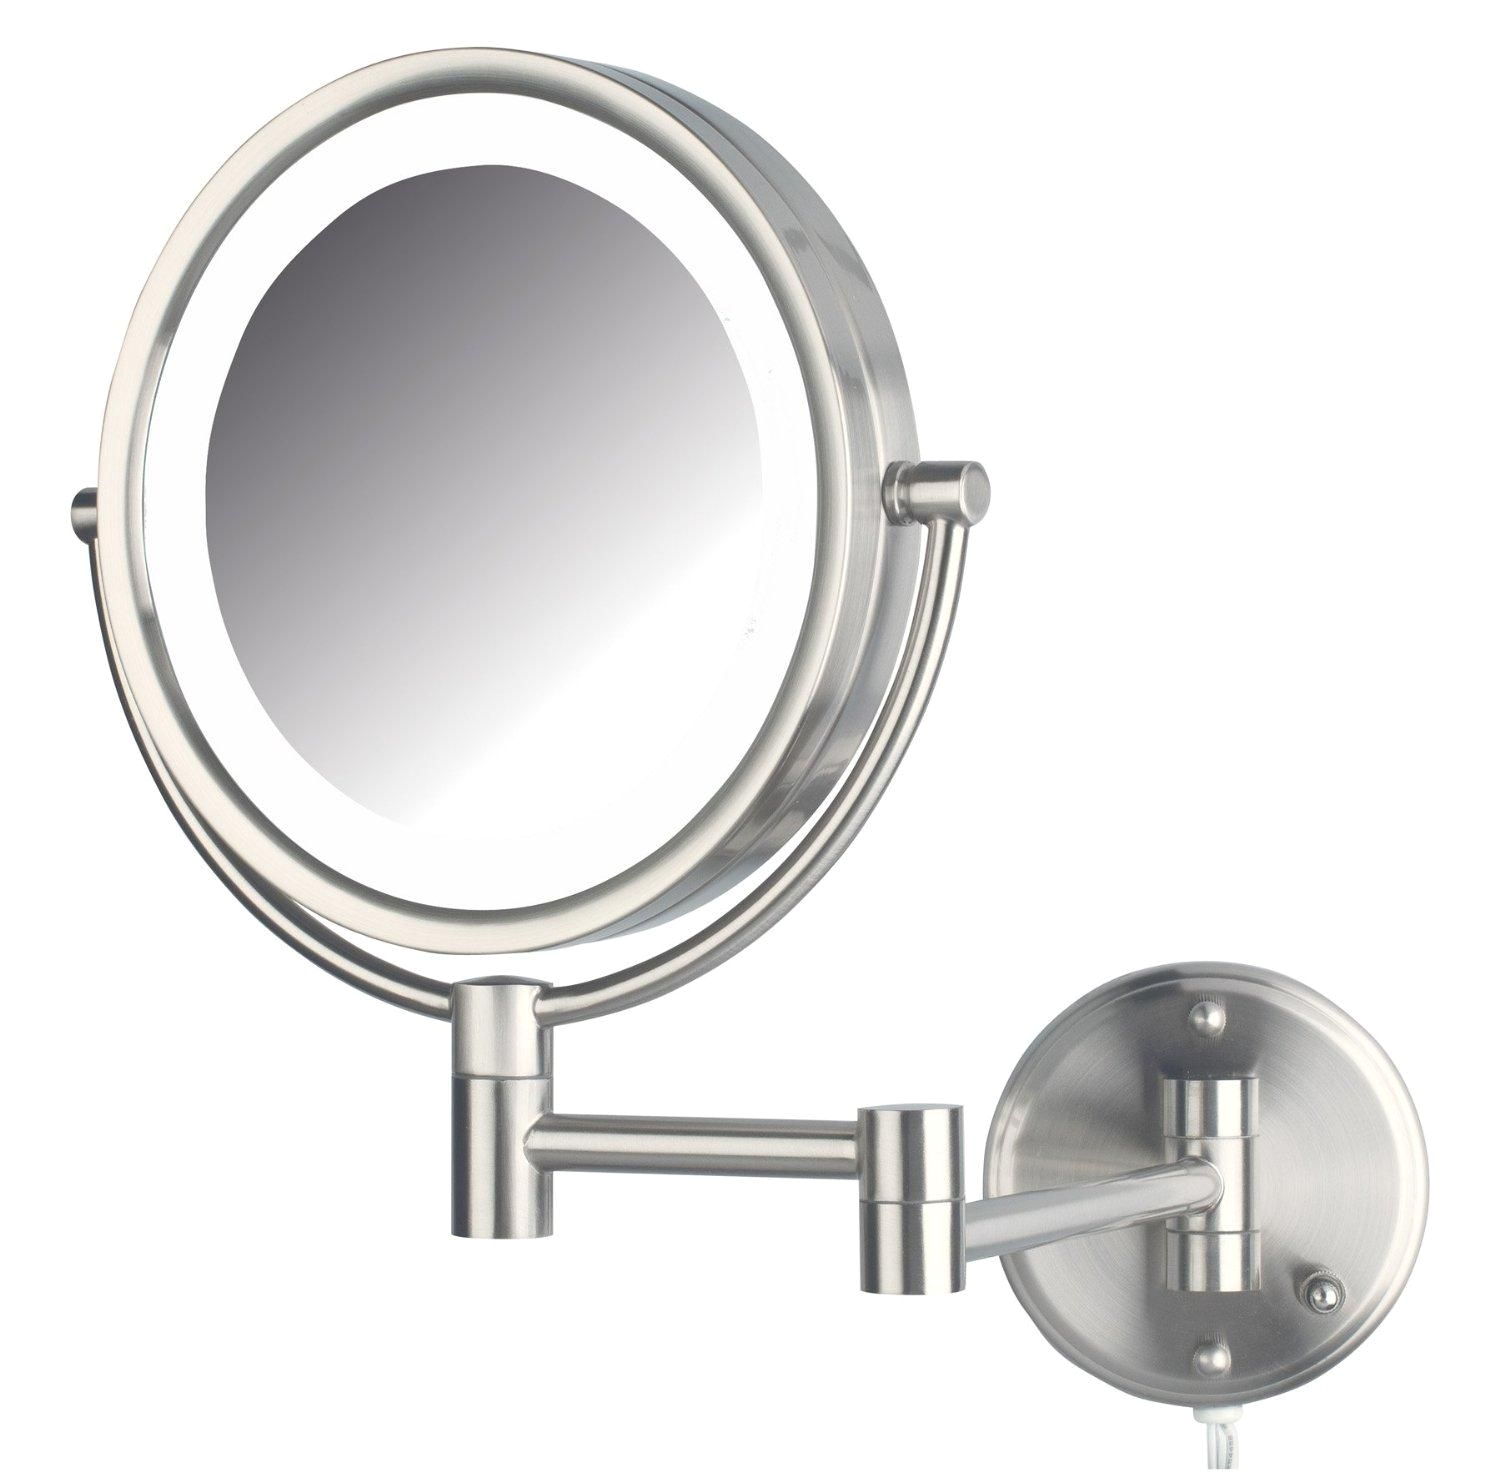 amazon com jerdon hl88nl 8 5 inch led lighted wall mount makeup mirror with 8x magnification nickel finish beauty